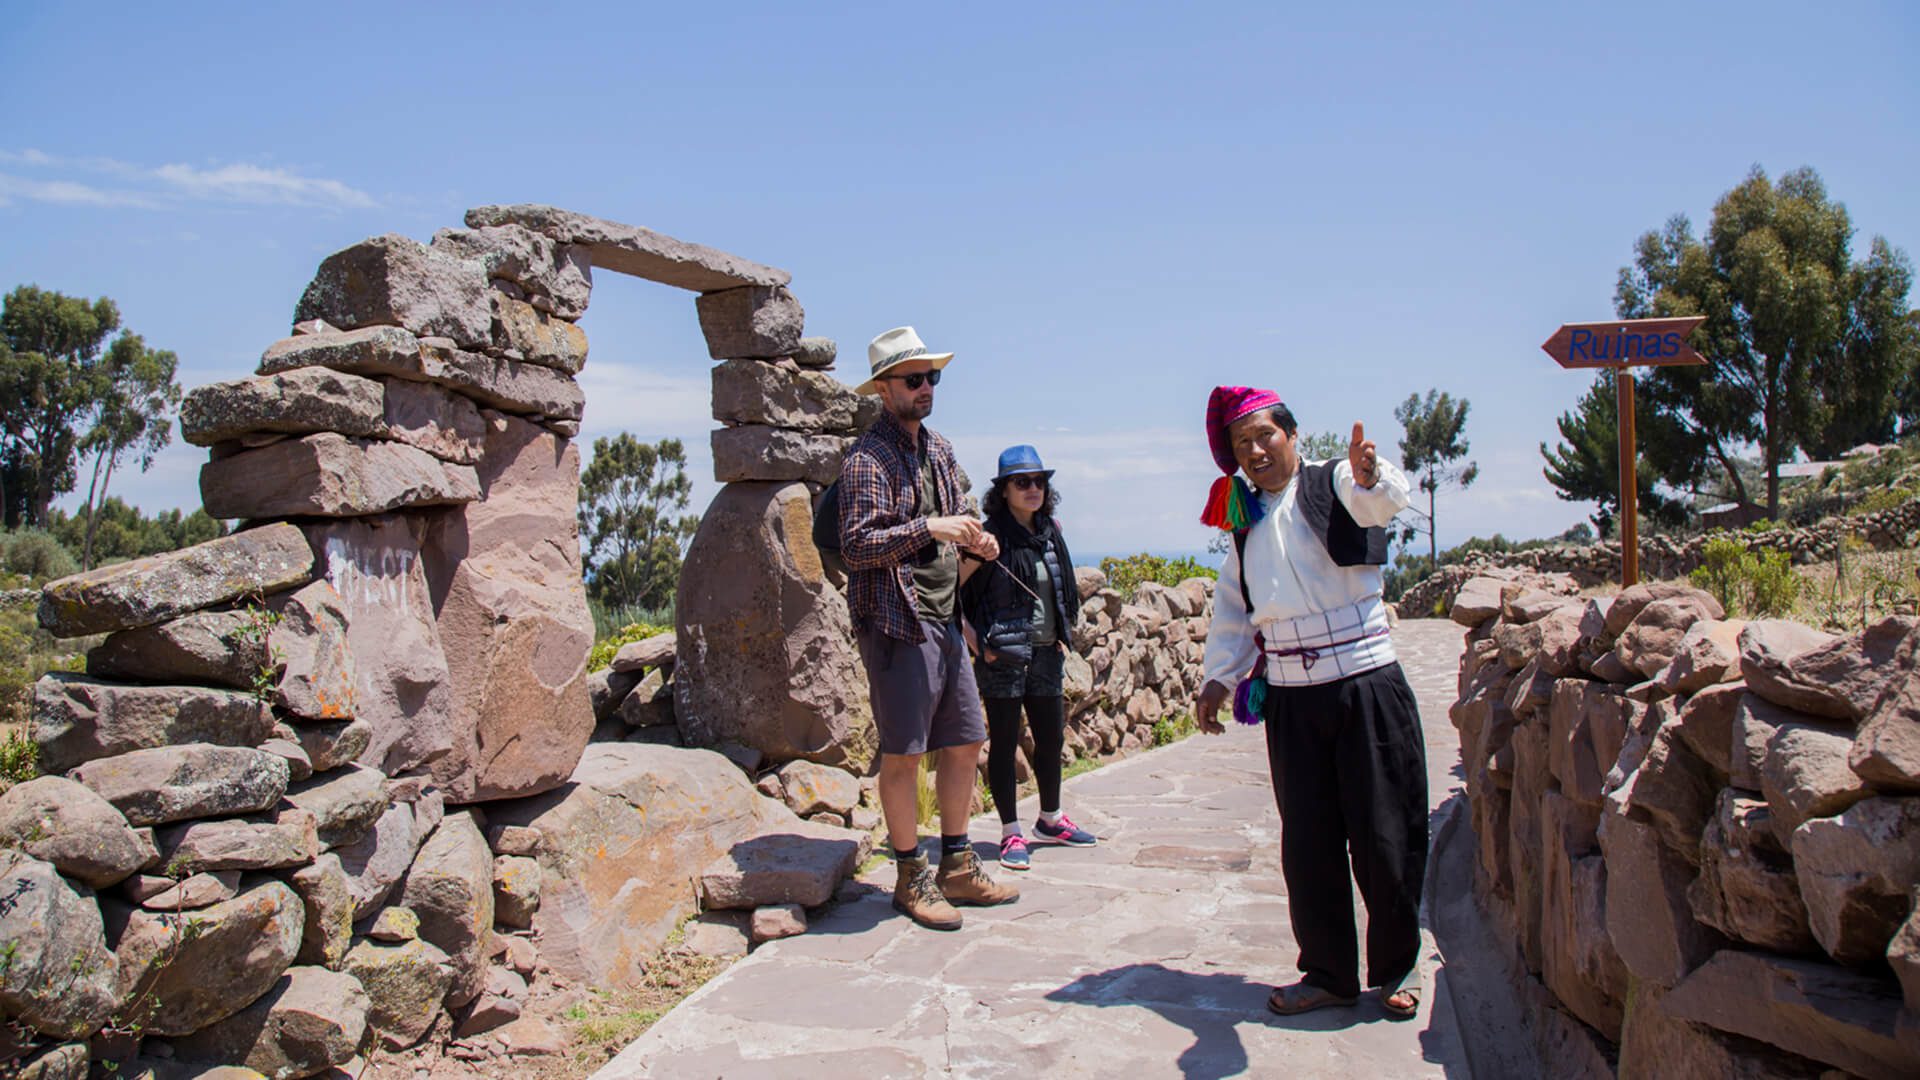 Celso guiding in his hometown Taquile, lake Titicaca | RESPONSible Travel Peru